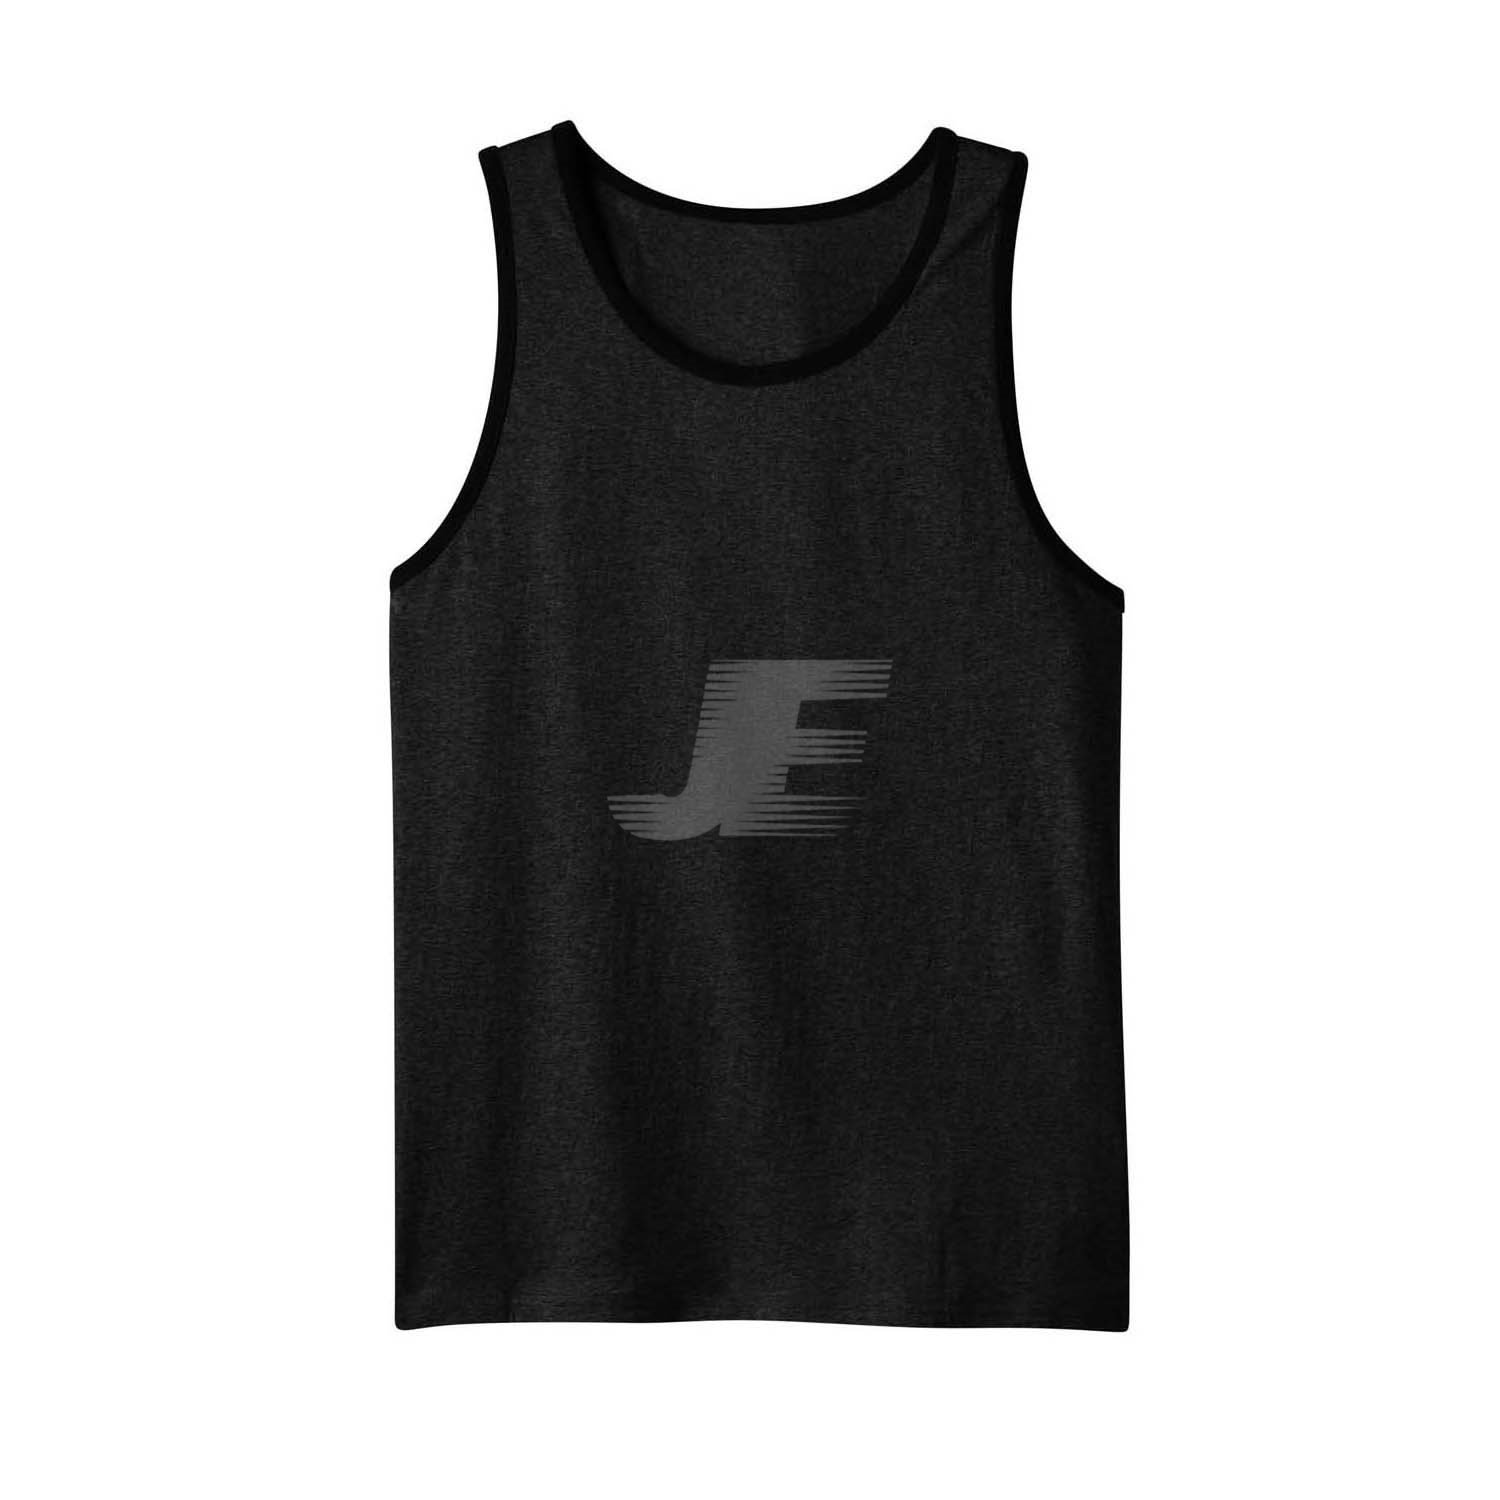 Men's Charcoal Grey Tank Top With Black Piping